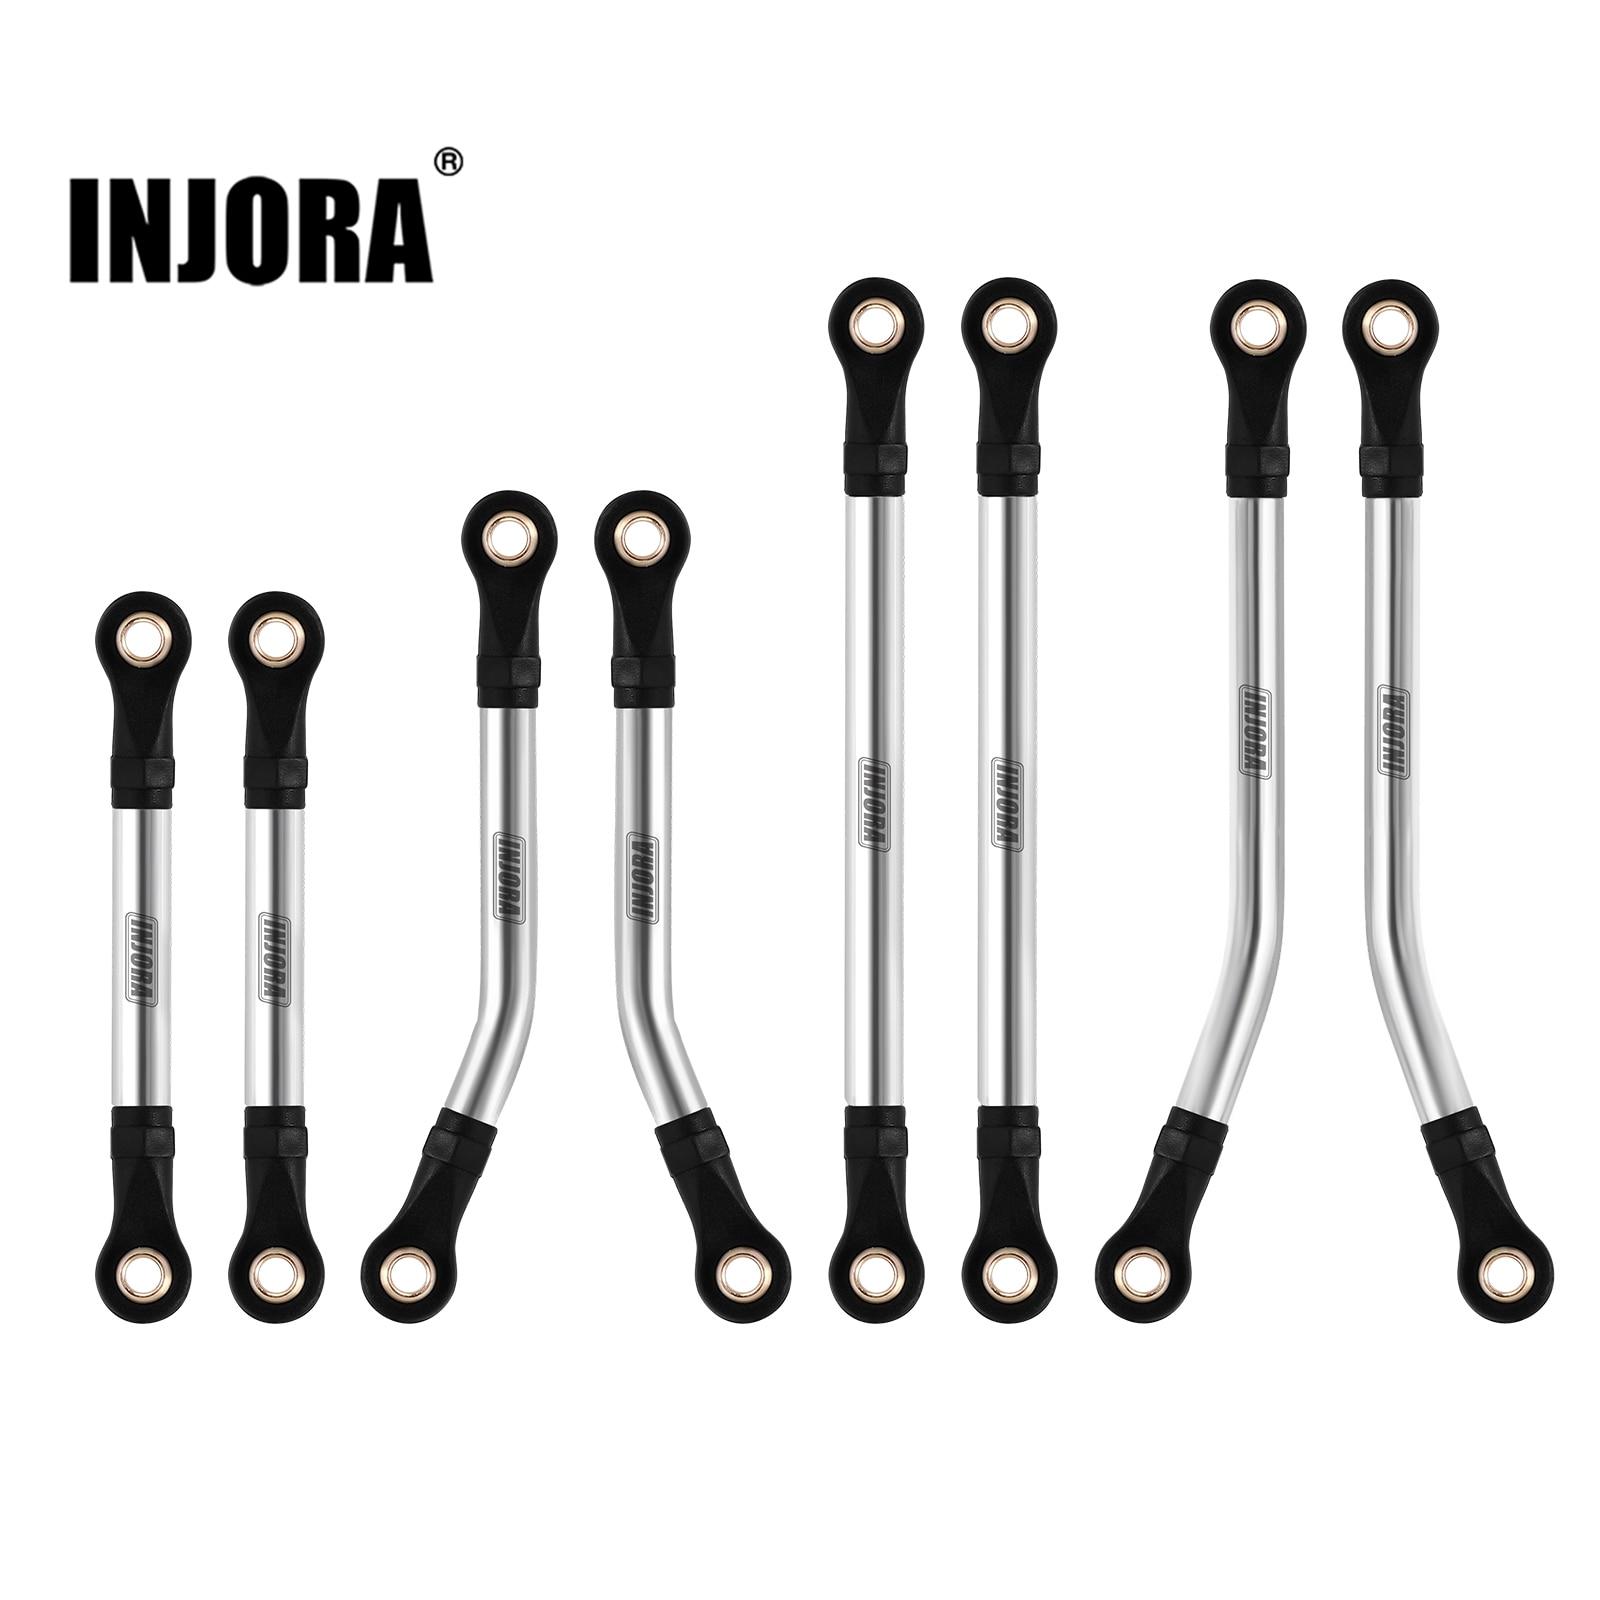 INJORA-8PCS-Stainless-Steel-High-Clearance-Links-Set-for-1-18-RC-Crawler-TRX4M-Upgrade-Parts.jpg